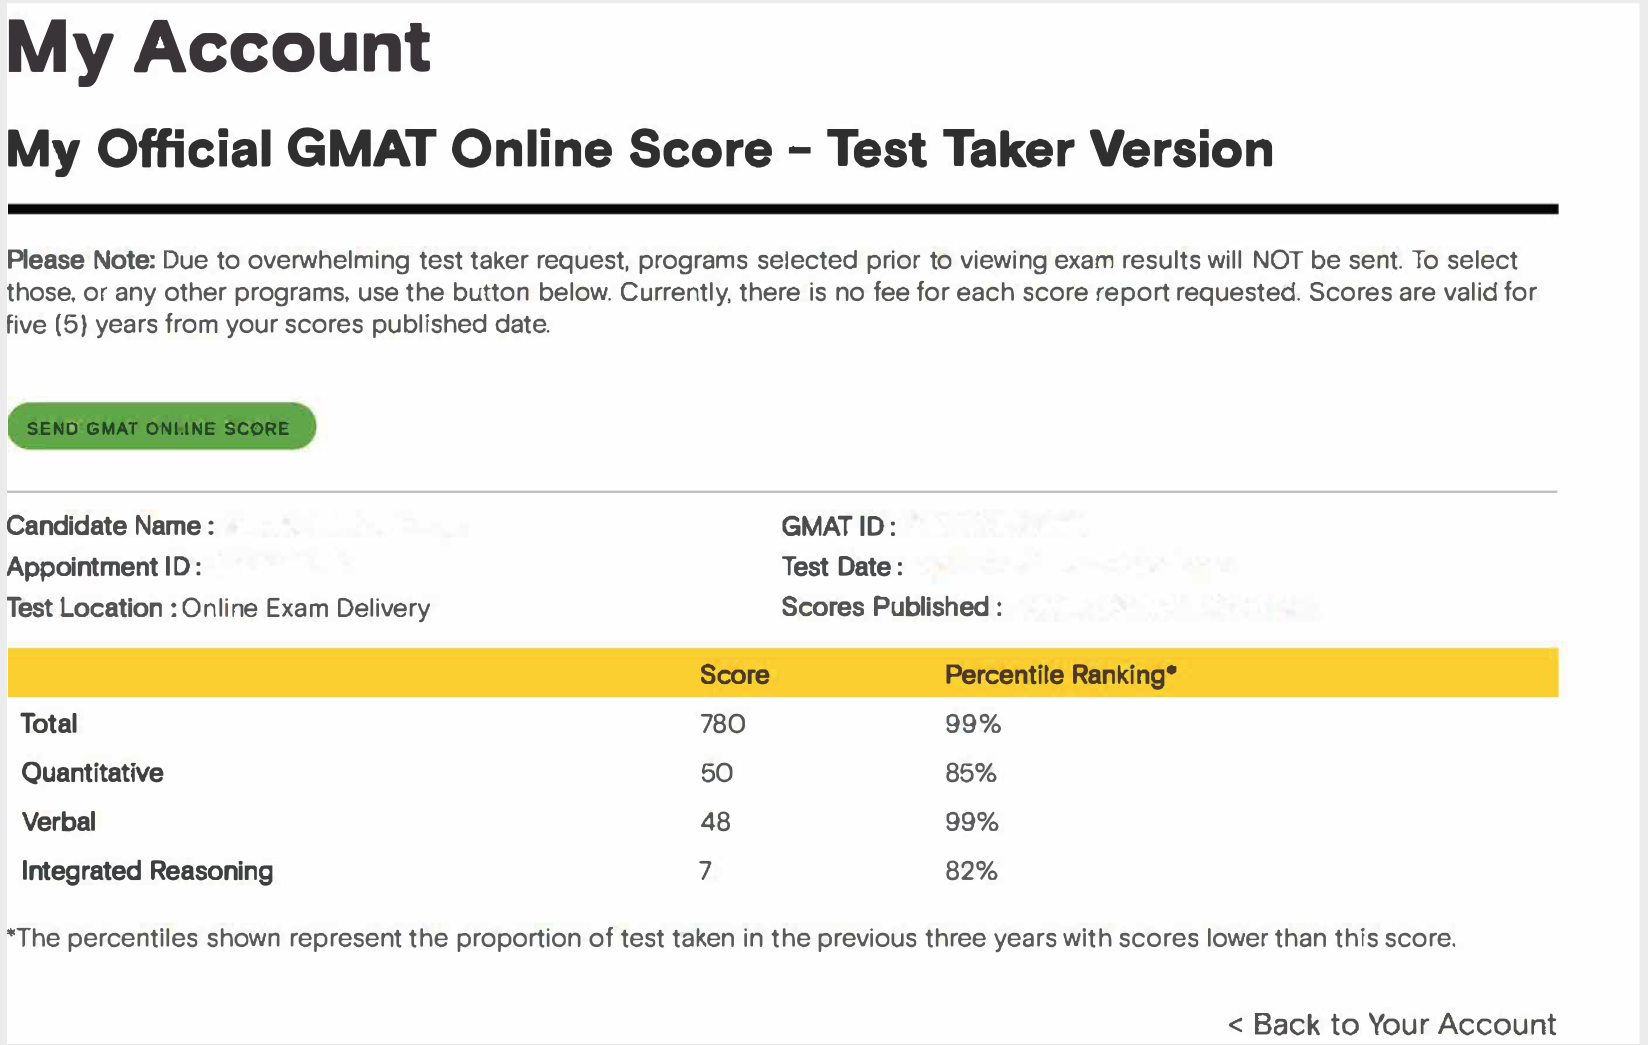 680 to 730 in 2 months  Scoring GMAT 700+ using data and hyper